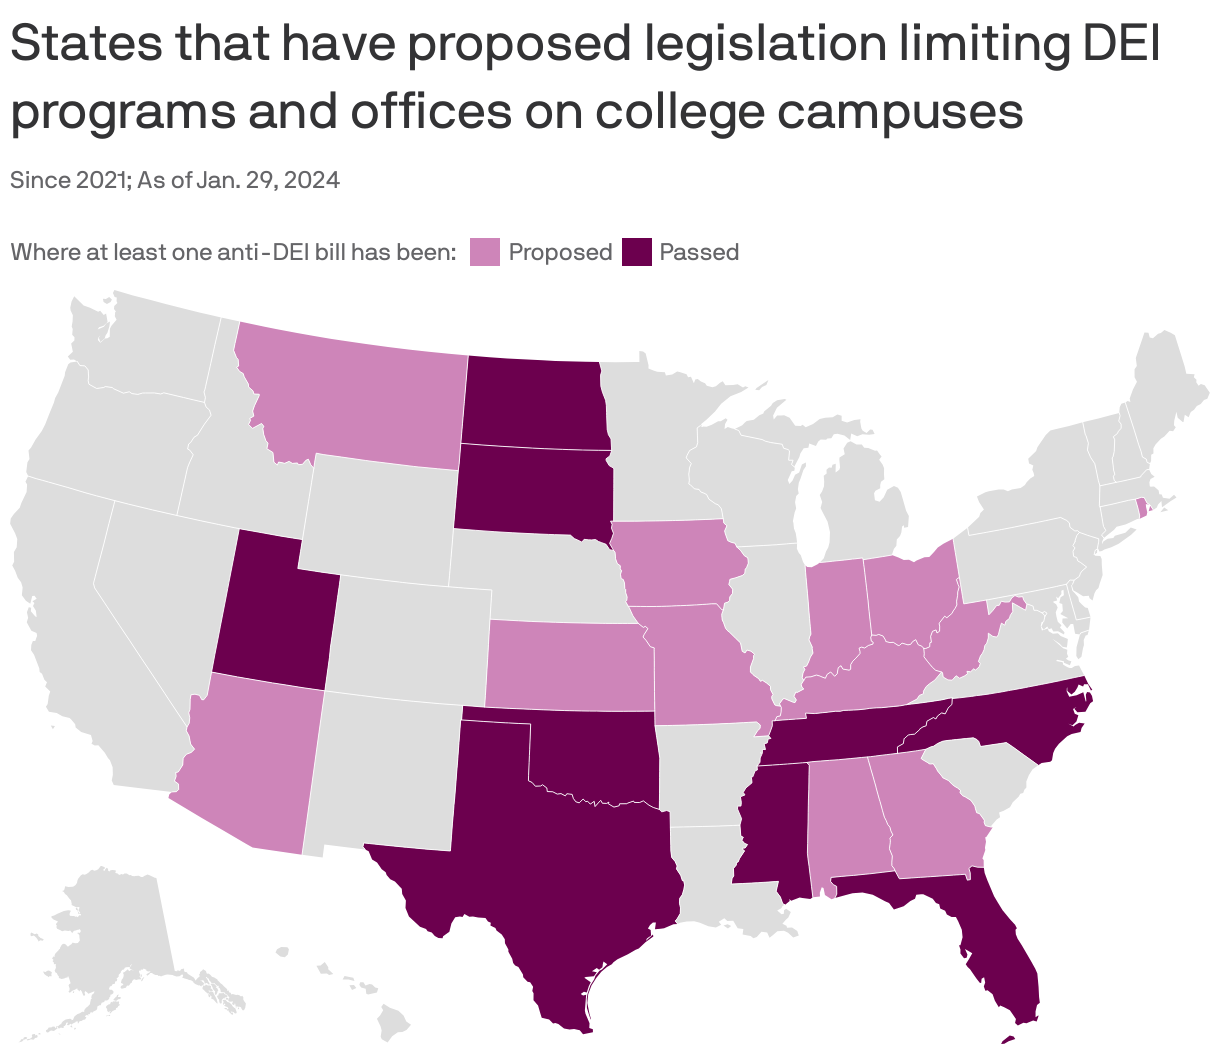 States that have proposed legislation limiting DEI programs and offices on college campuses